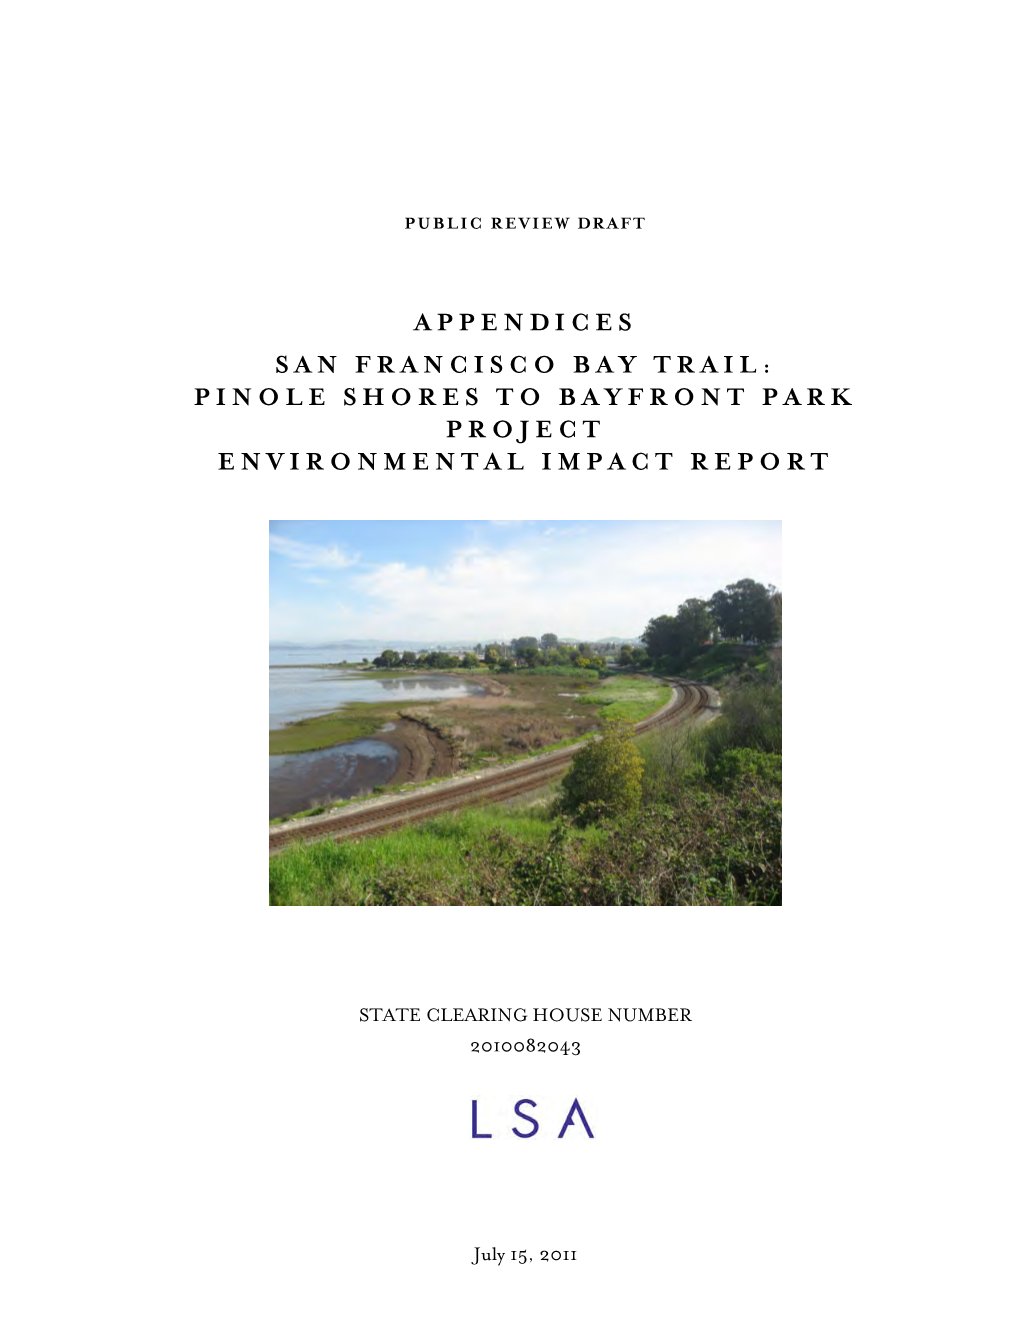 Pinole Shores to Bayfront Park Project Environmental Impact Report